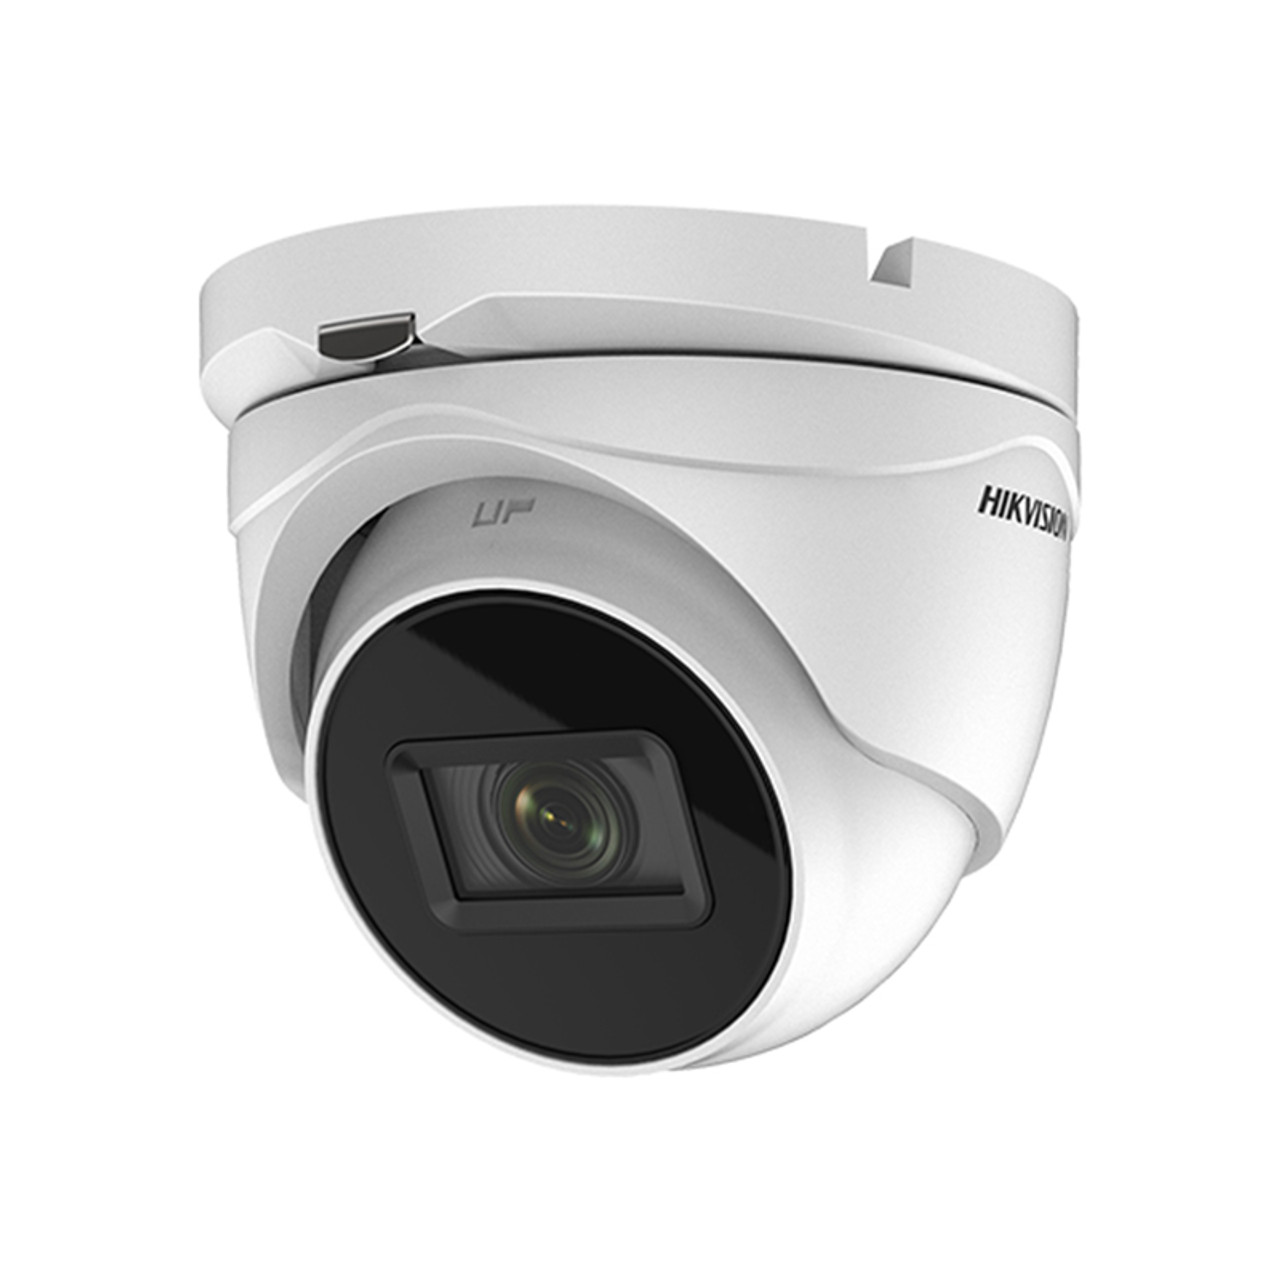 Hikvision DS-2CE79D3T-IT3ZF Outdoor CCTV Camera